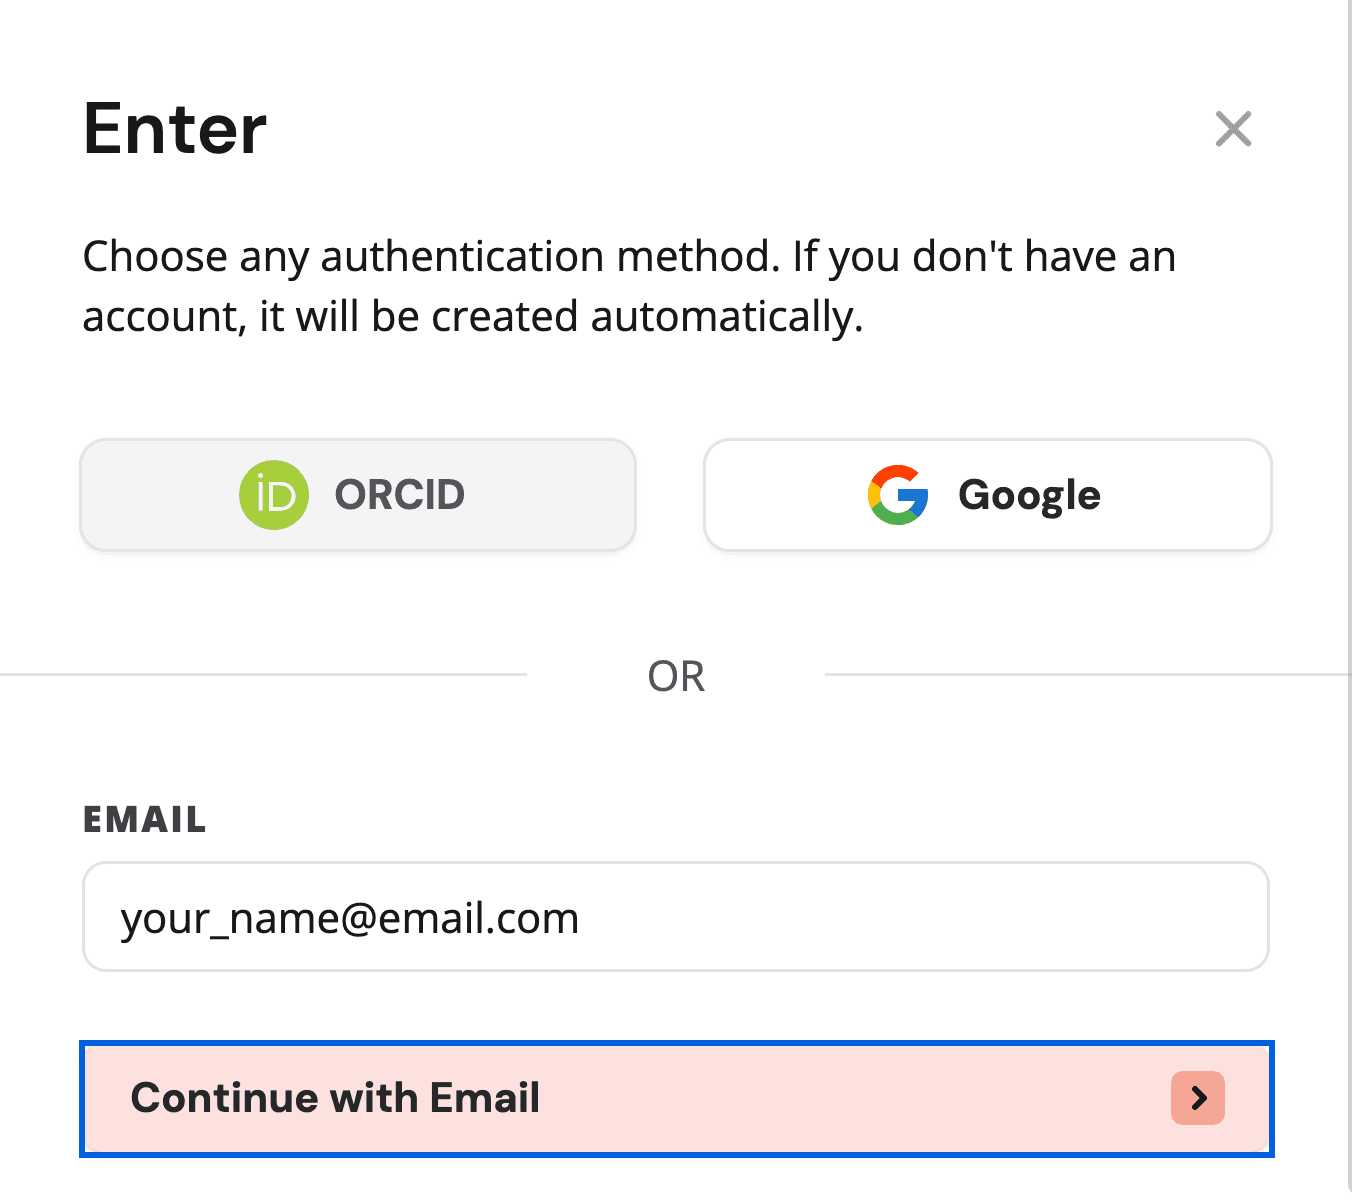 Enter modal with an email populating the email field